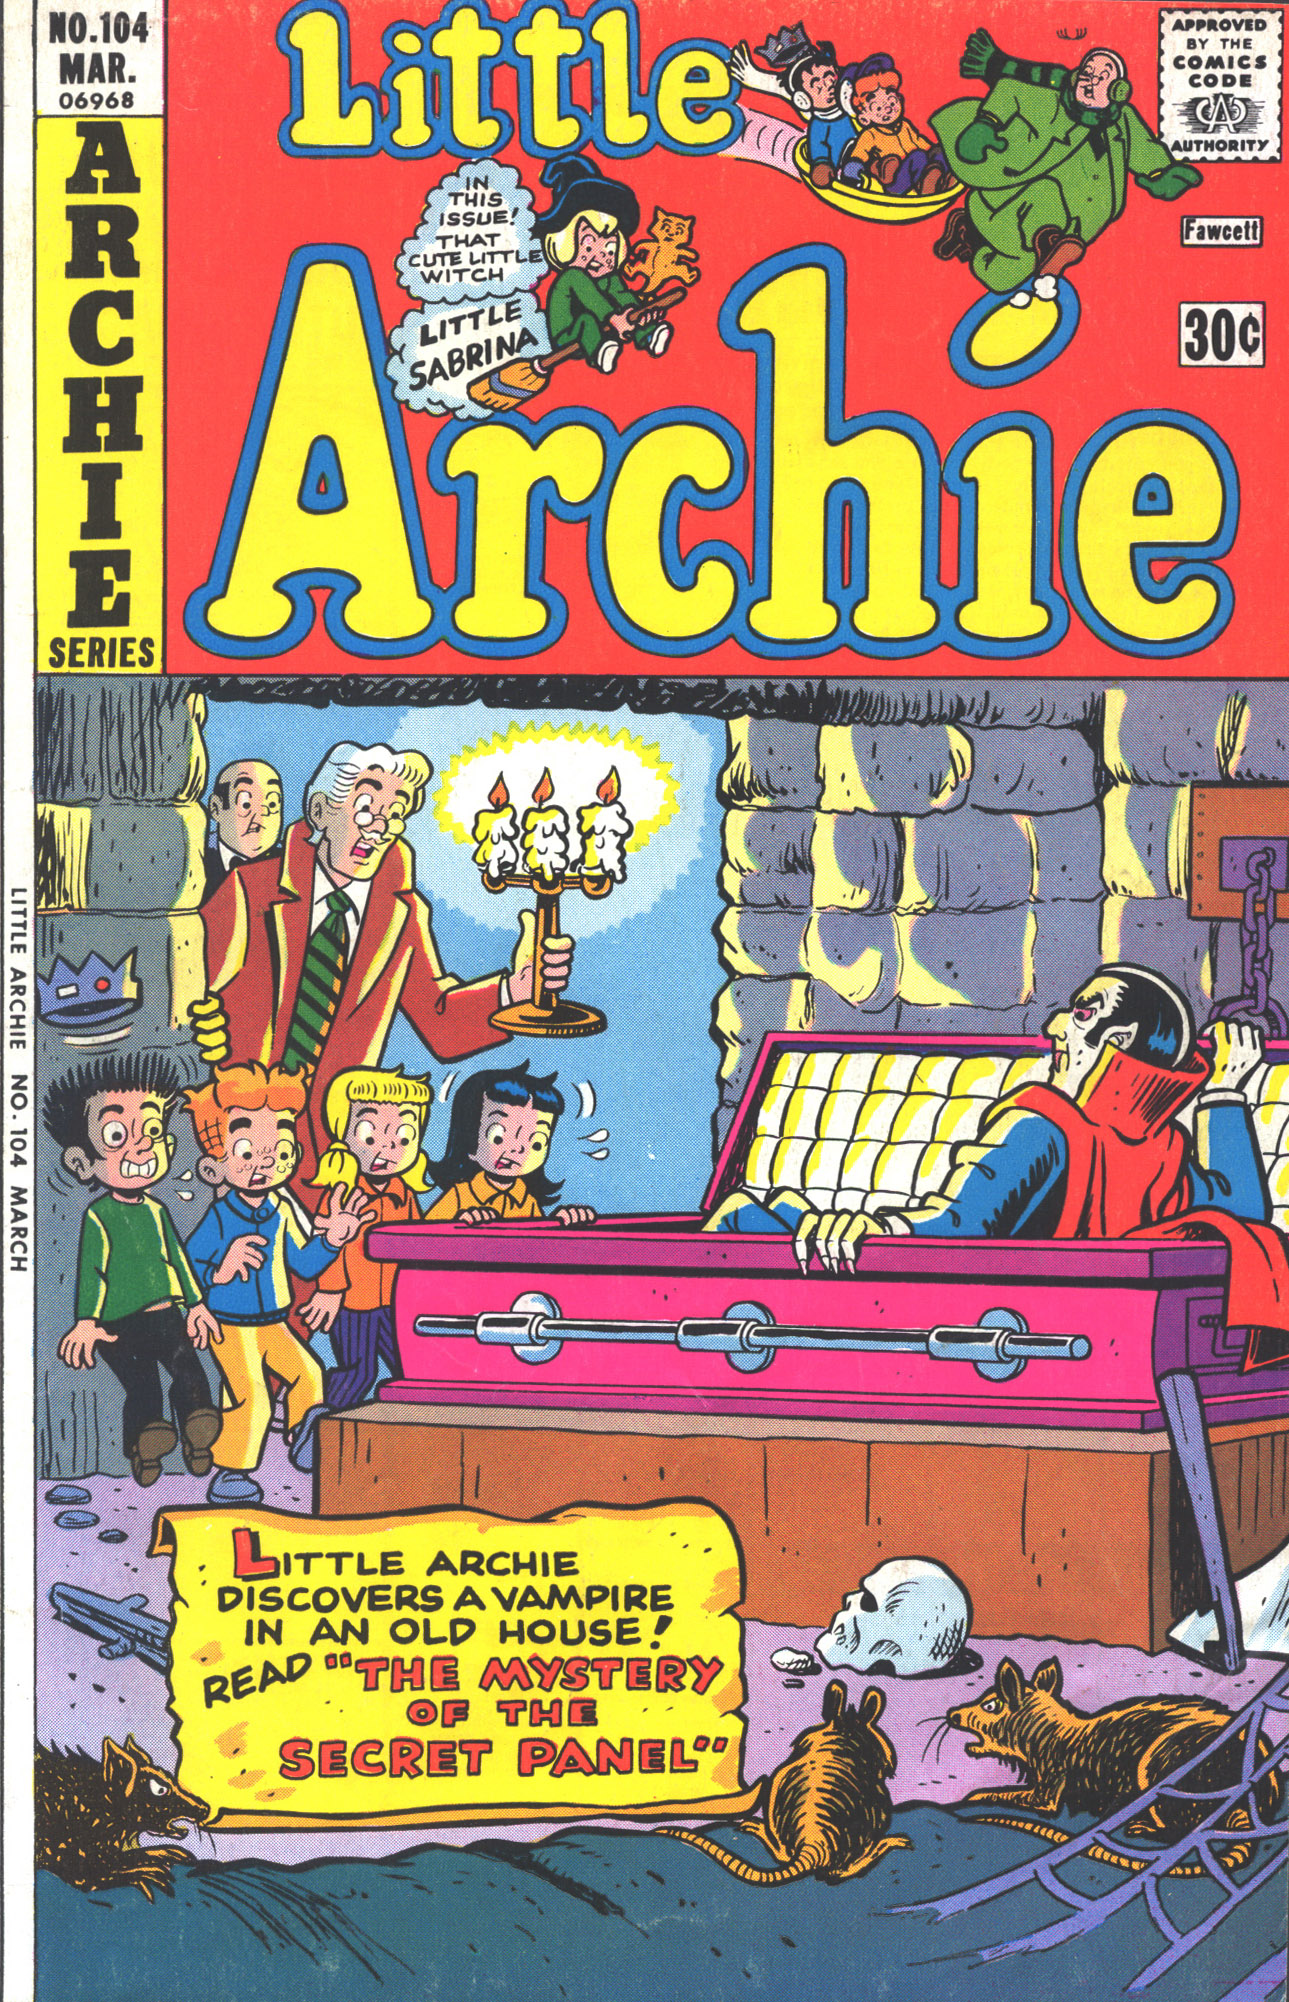 Read online The Adventures of Little Archie comic -  Issue #104 - 1